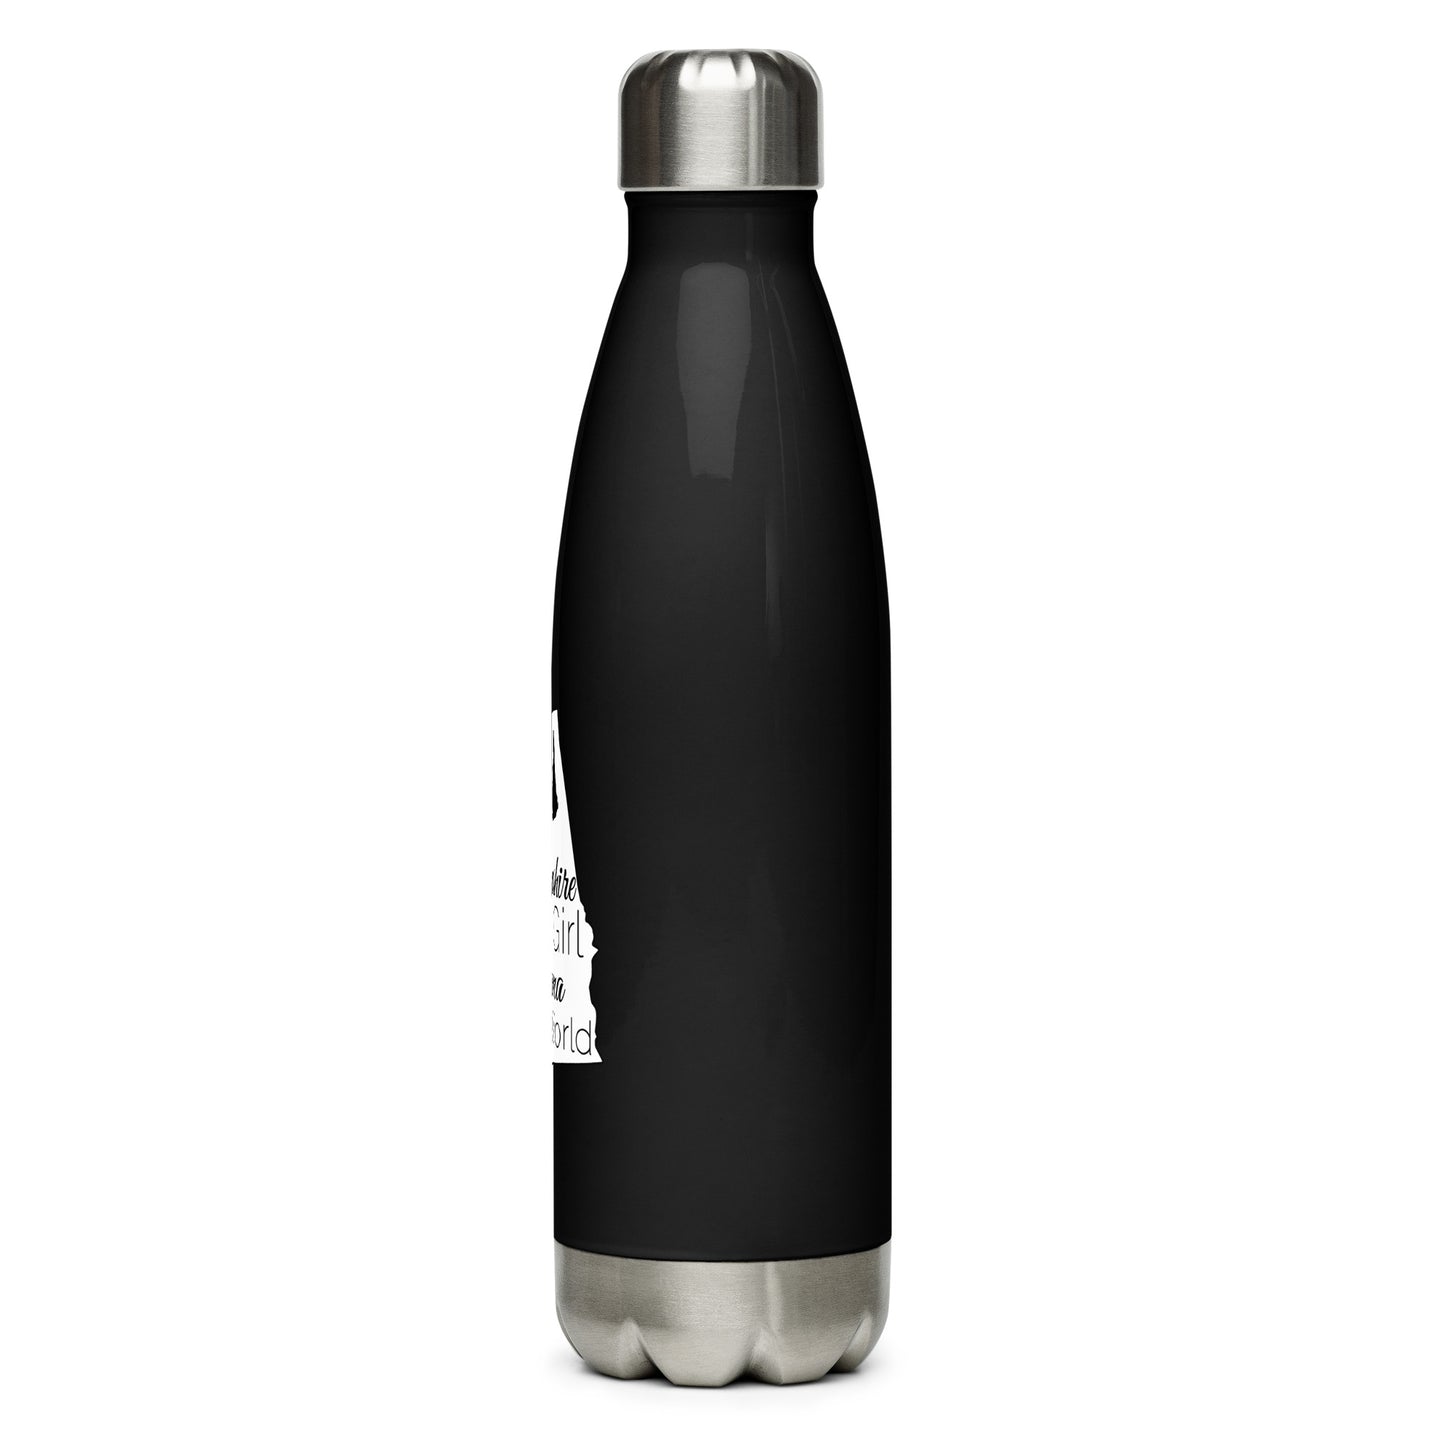 Just a New Hampshire Girl in an Alabama World Stainless Steel Water Bottle